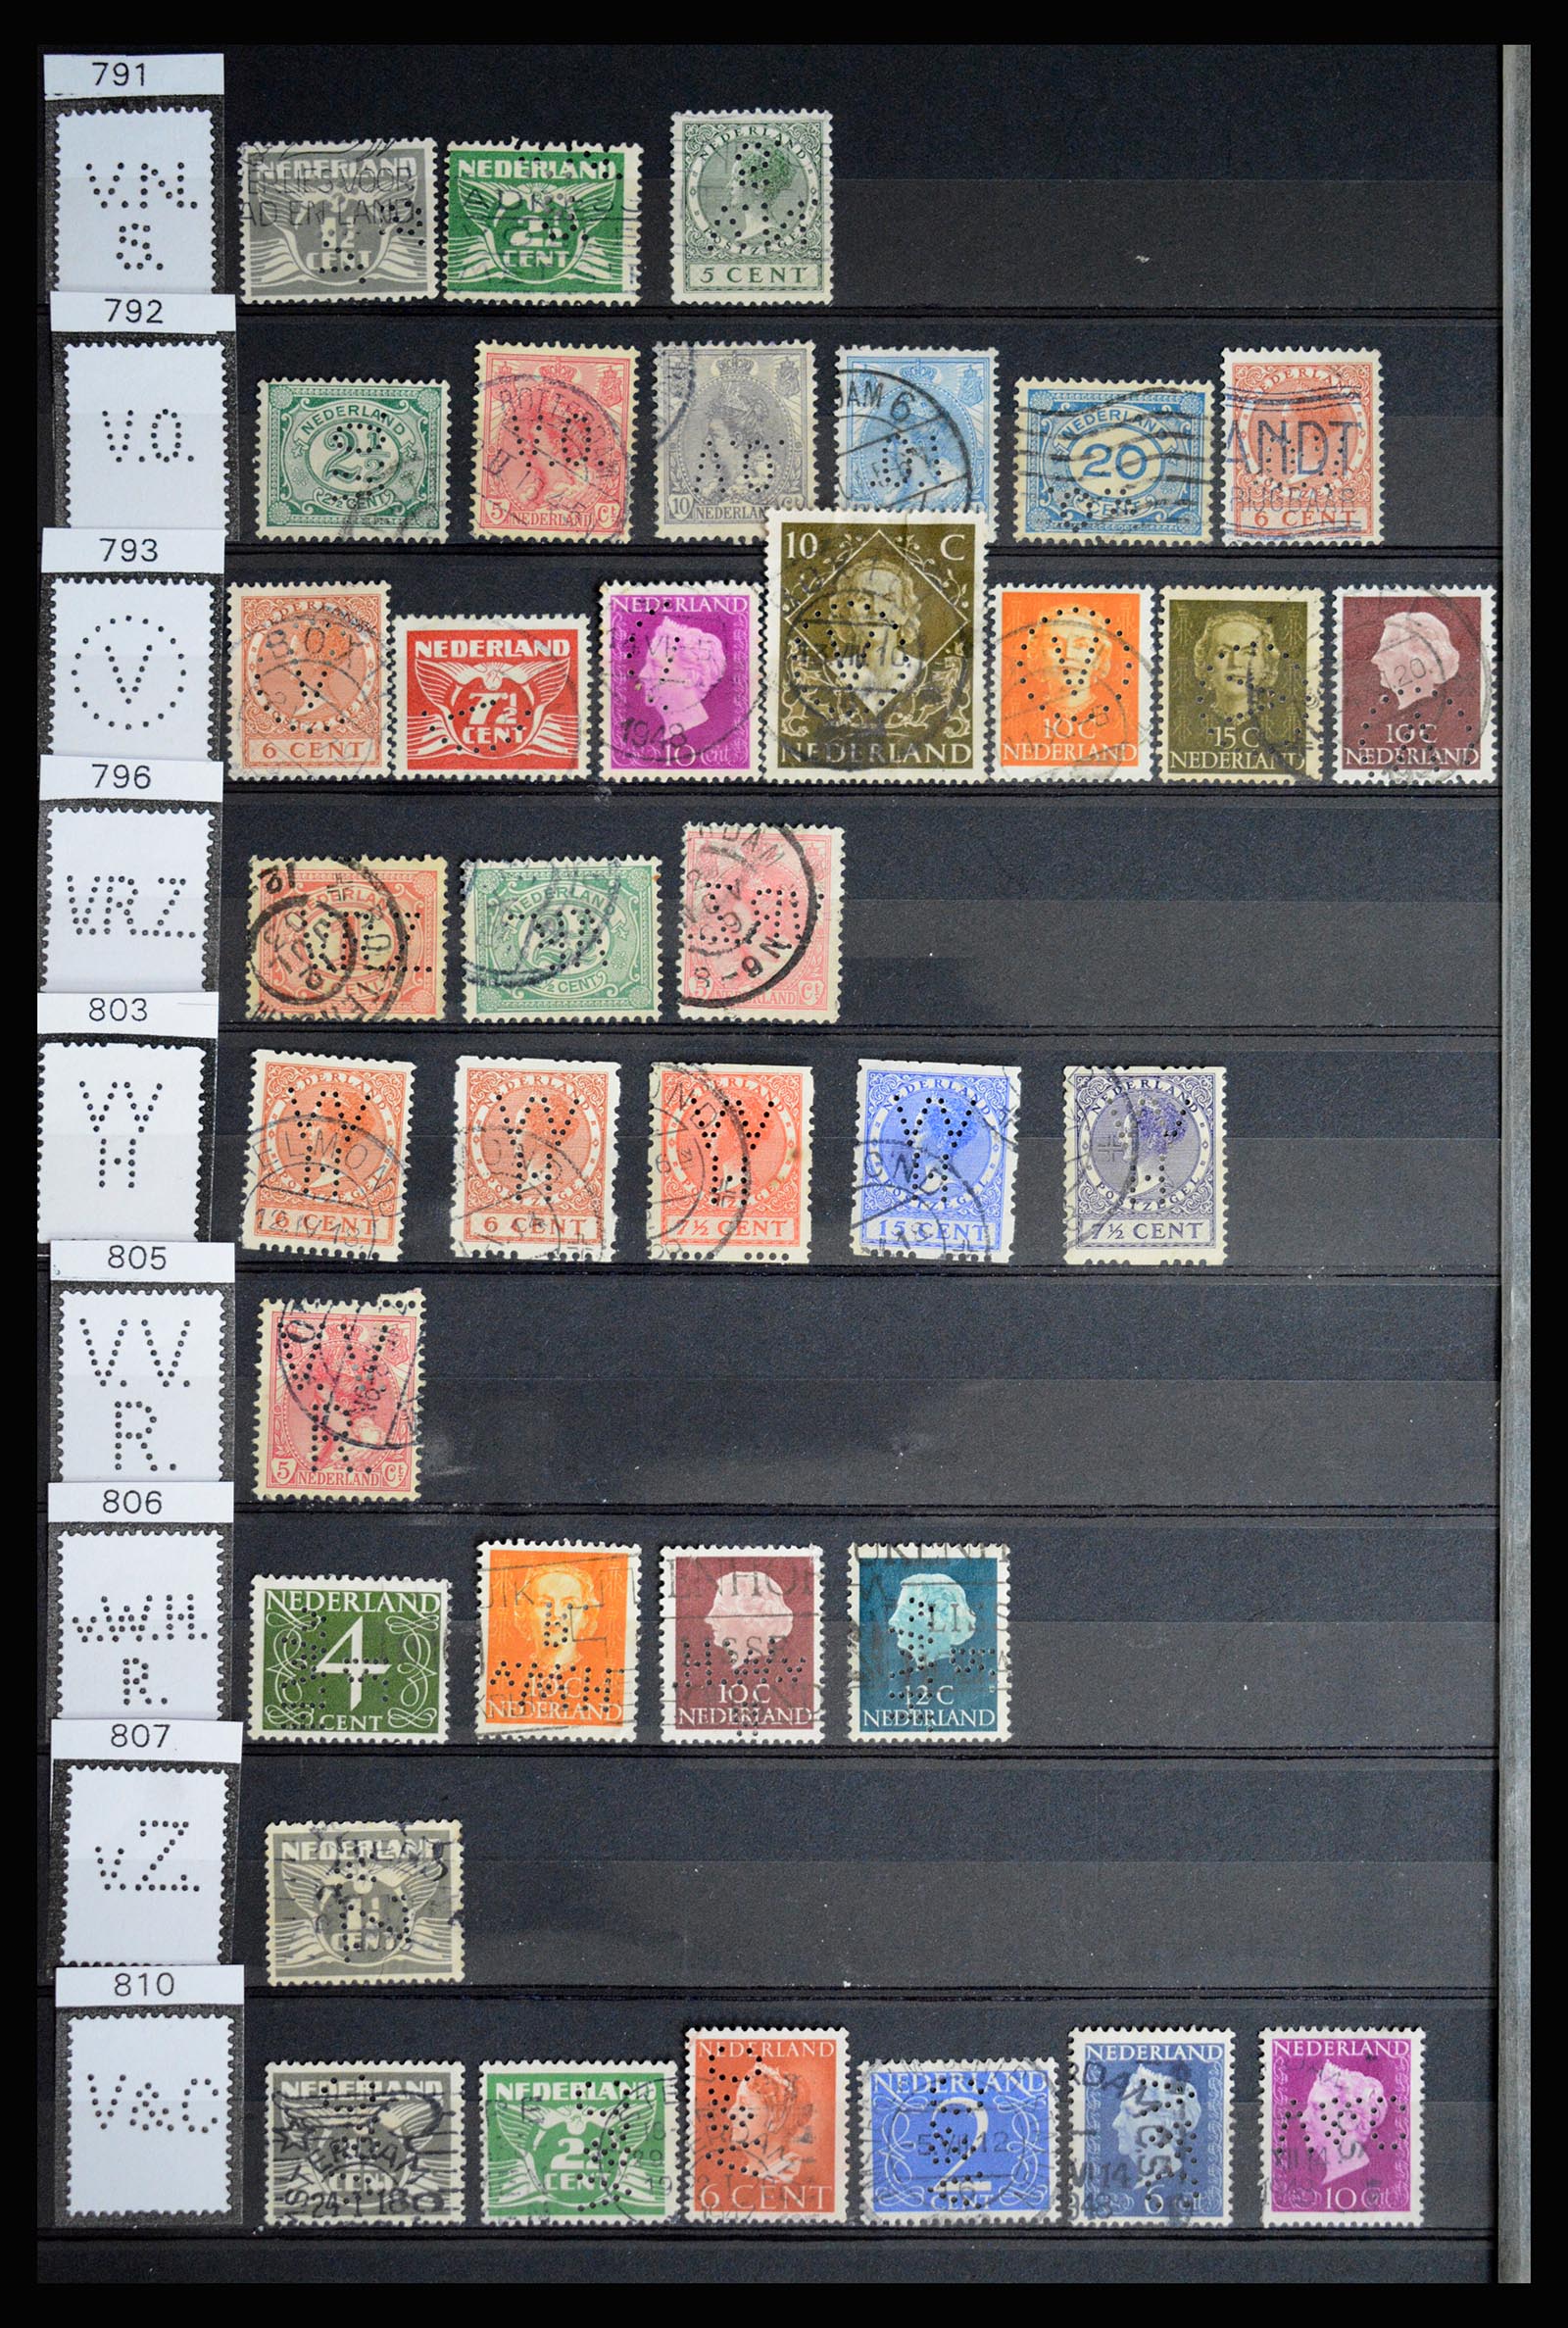 36849 076 - Stamp collection 36849 Netherlands perfins 1891-1960.